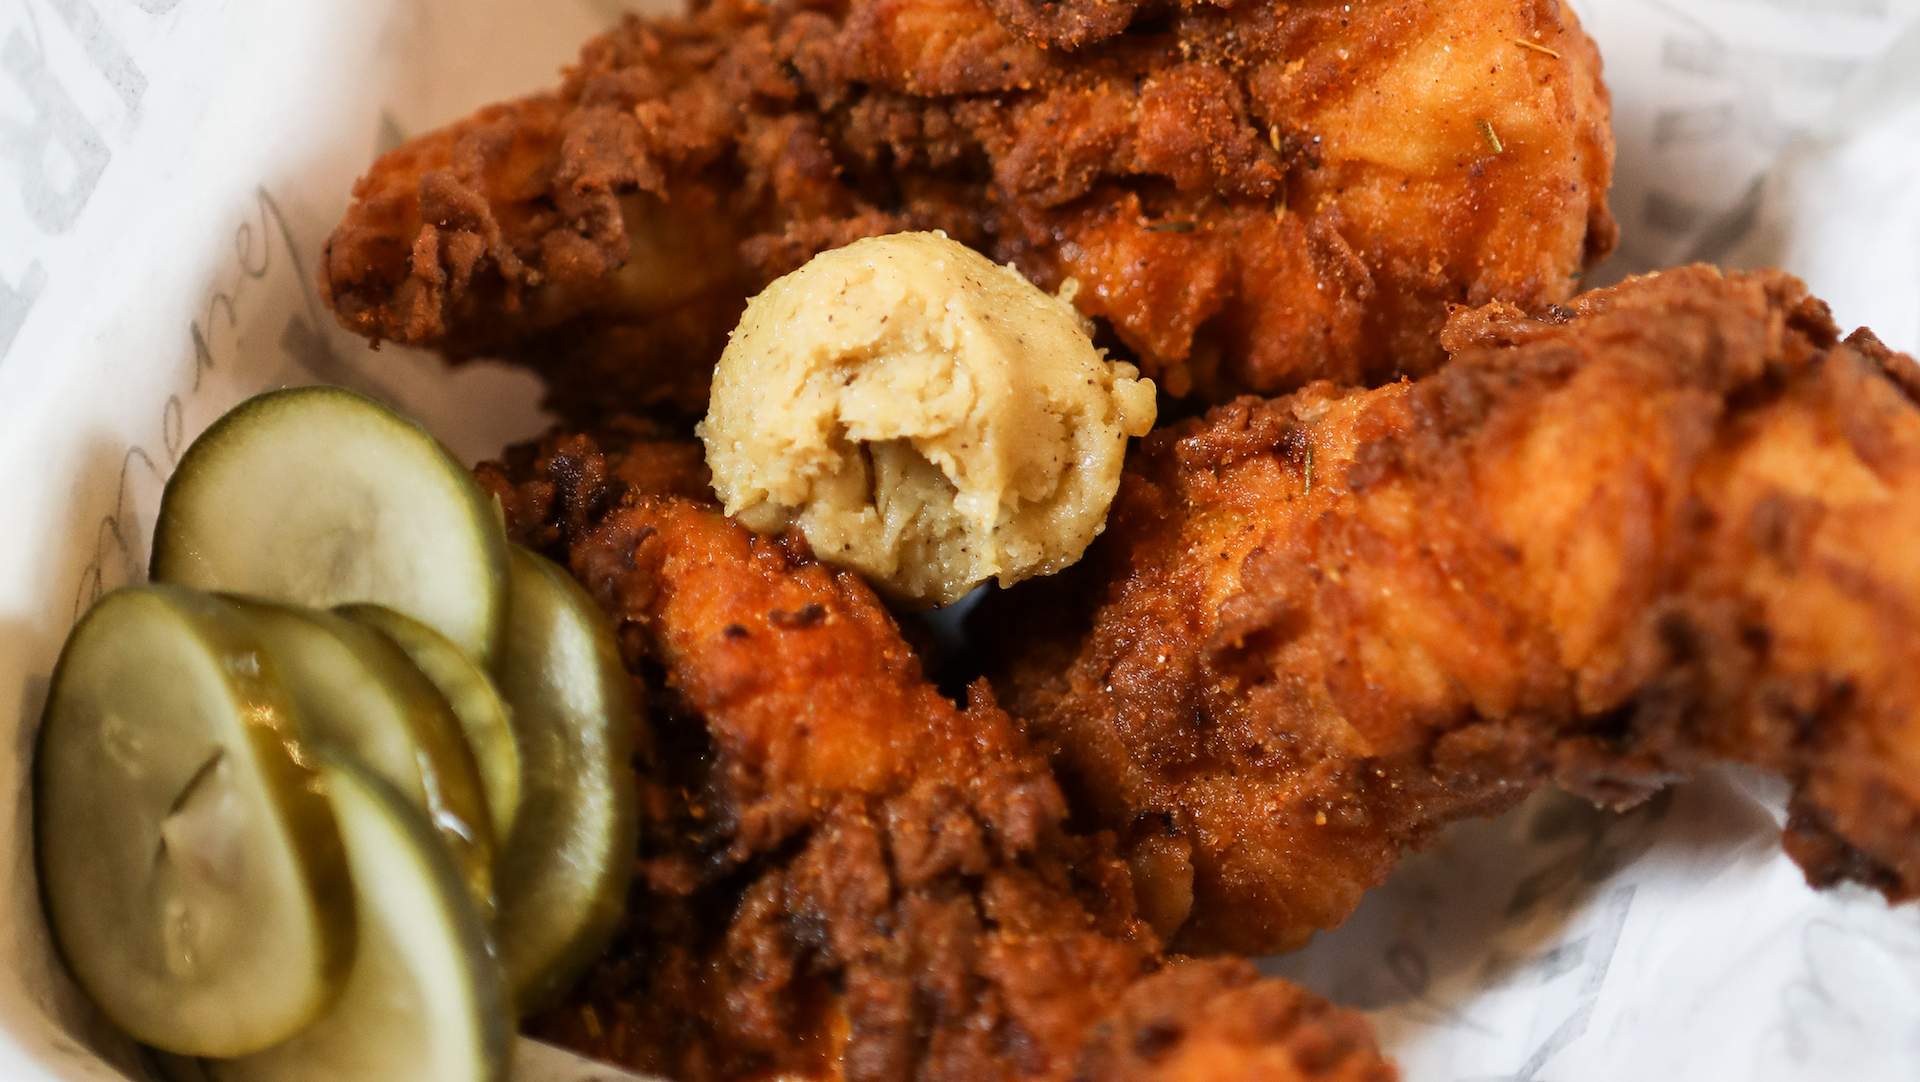 Dirty Little Secret Has Launched a New Menu Dedicated to Fried Chicken